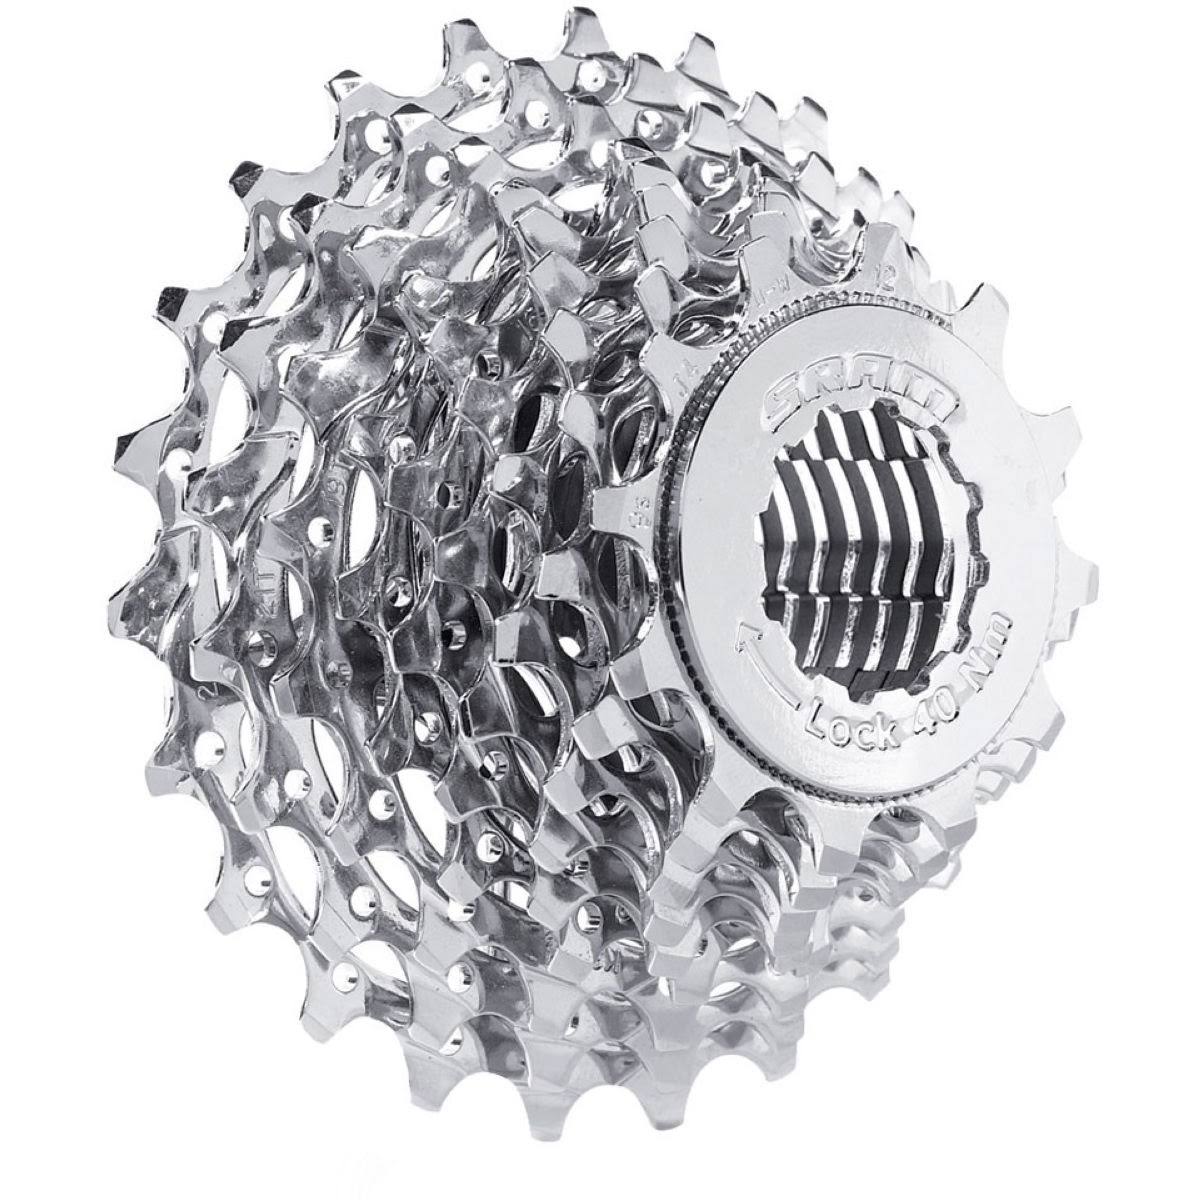 Sram PG-950 9-Speed Road Bicycle Cassette